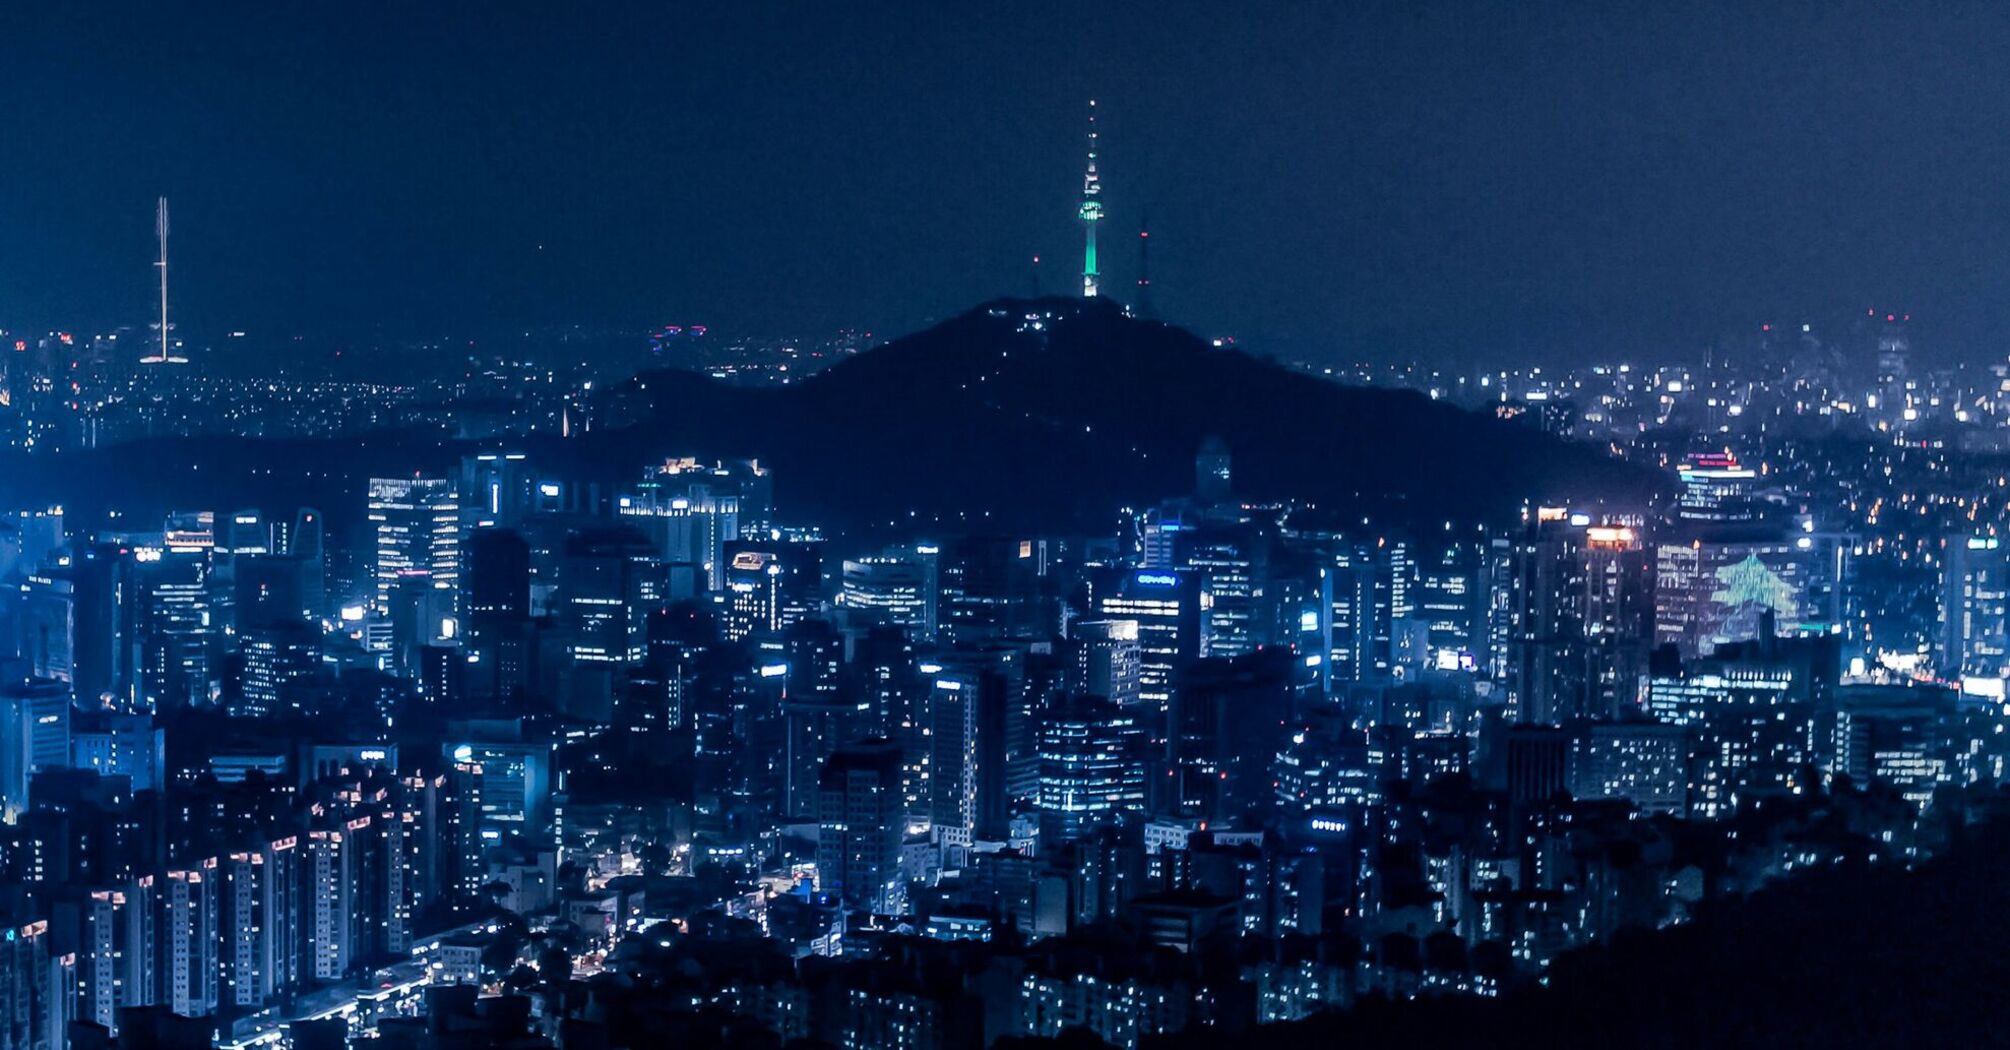 Seoul cityscape at night with illuminated buildings and Namsan Tower